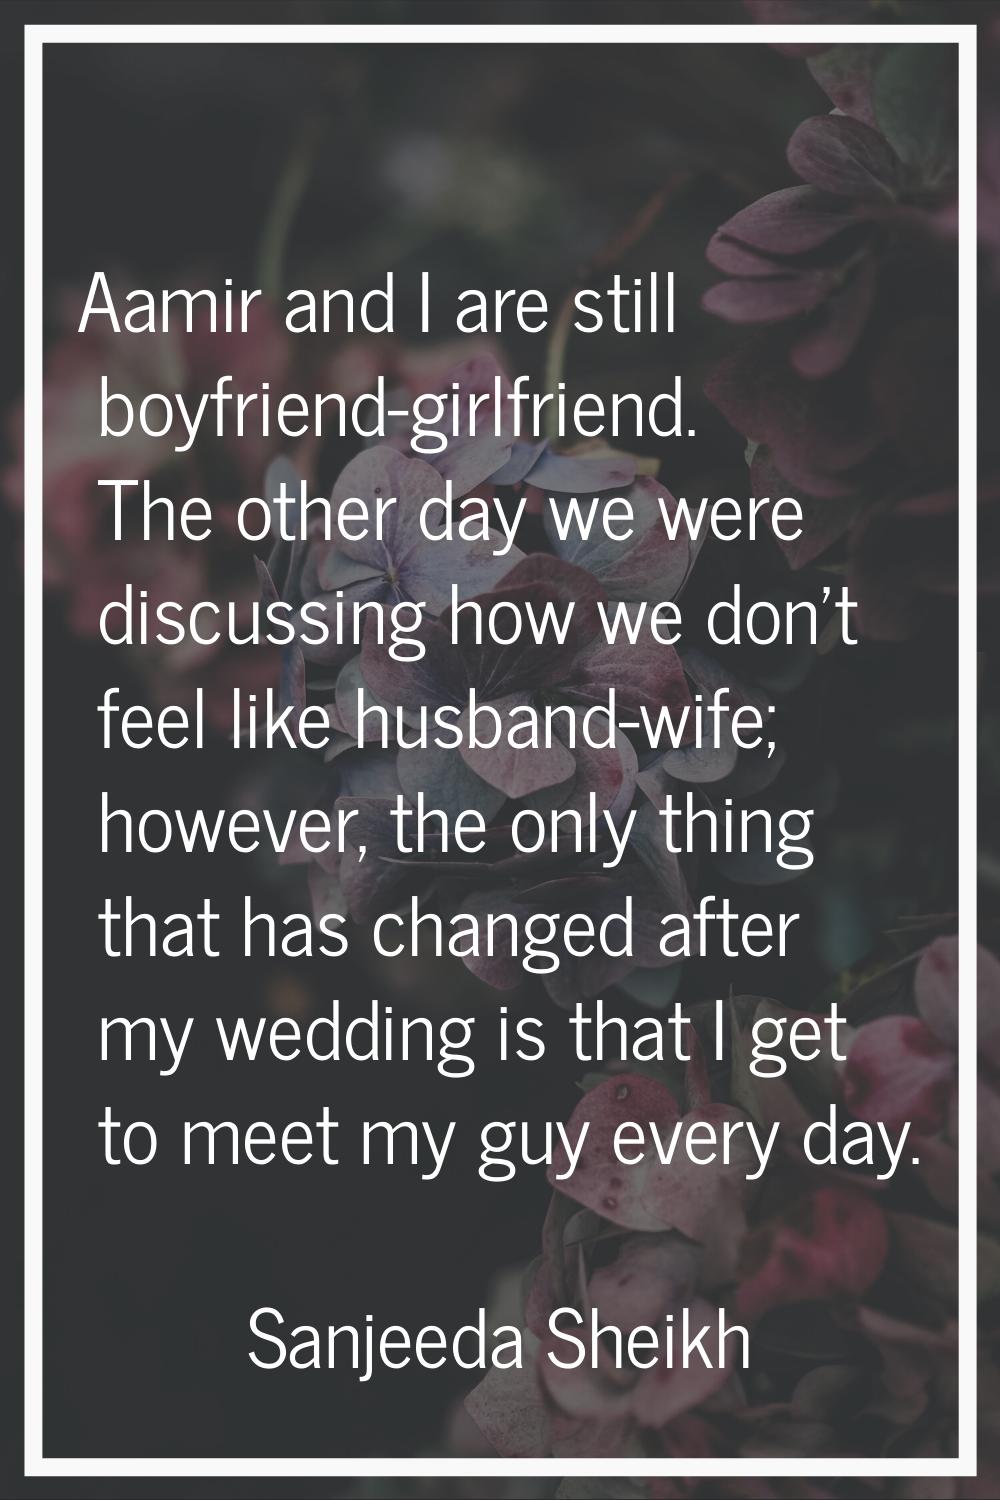 Aamir and I are still boyfriend-girlfriend. The other day we were discussing how we don't feel like